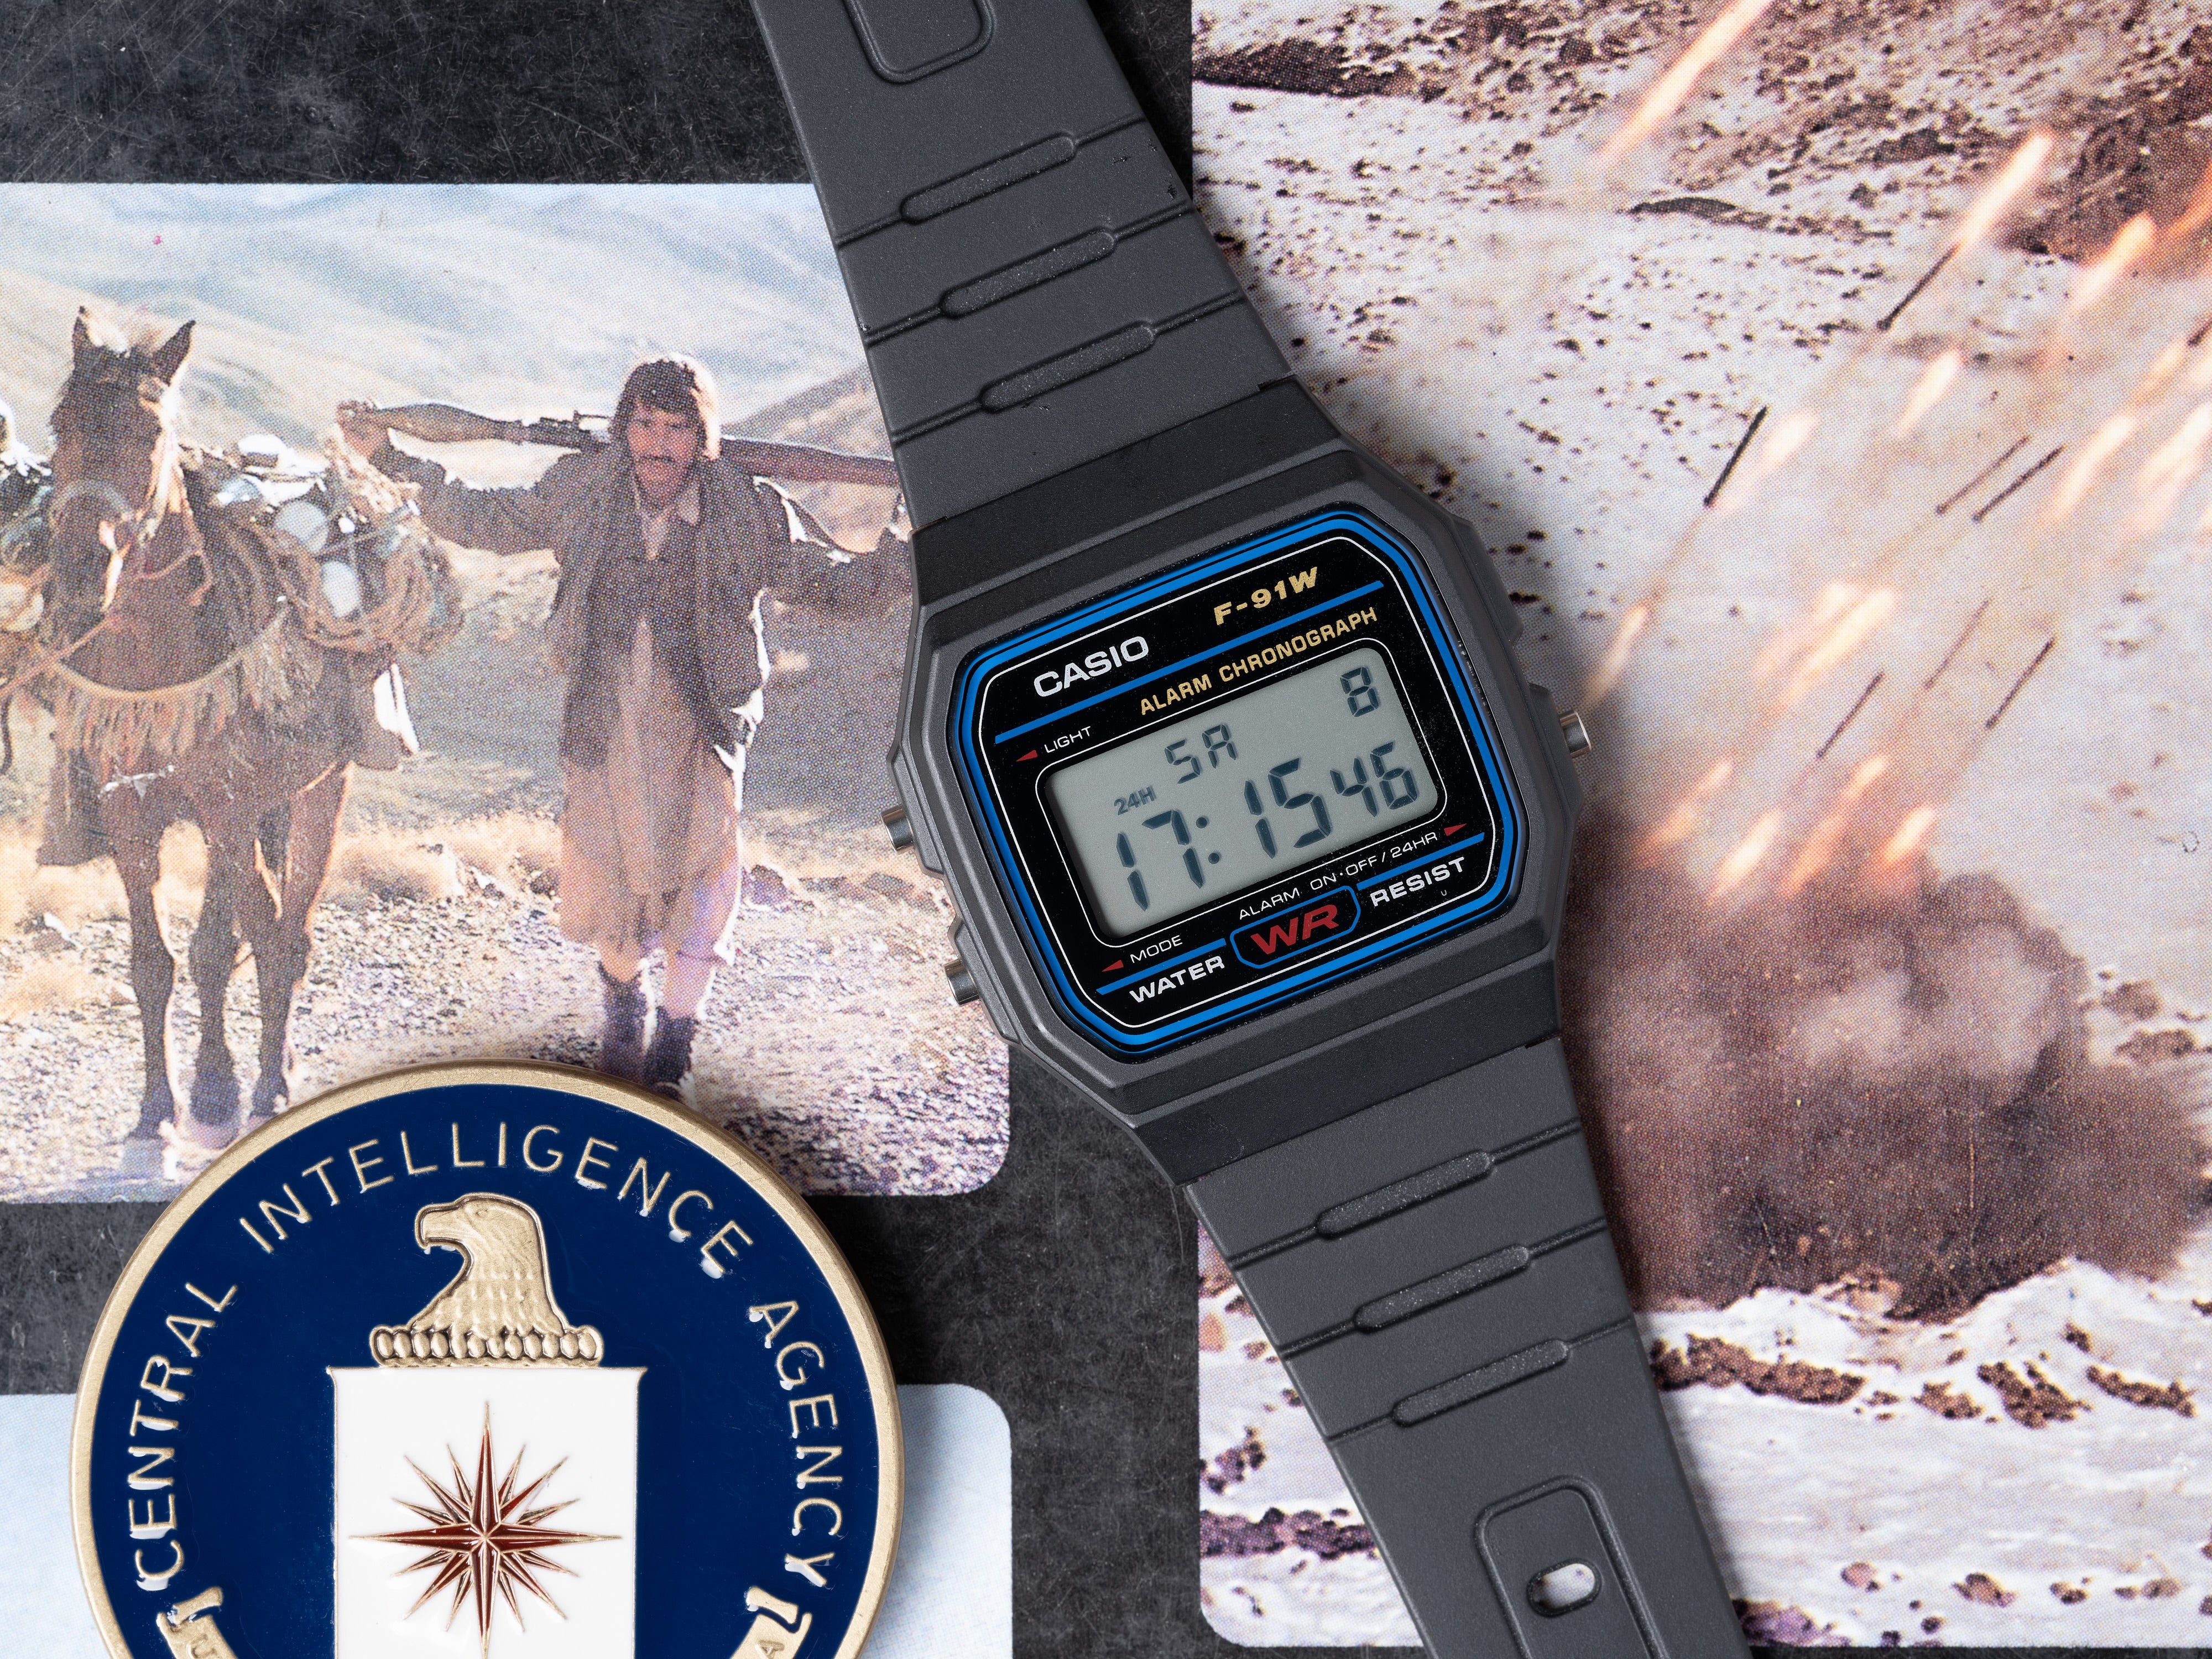 How The Casio F91W Became The Worlds Most Dangerous Watch